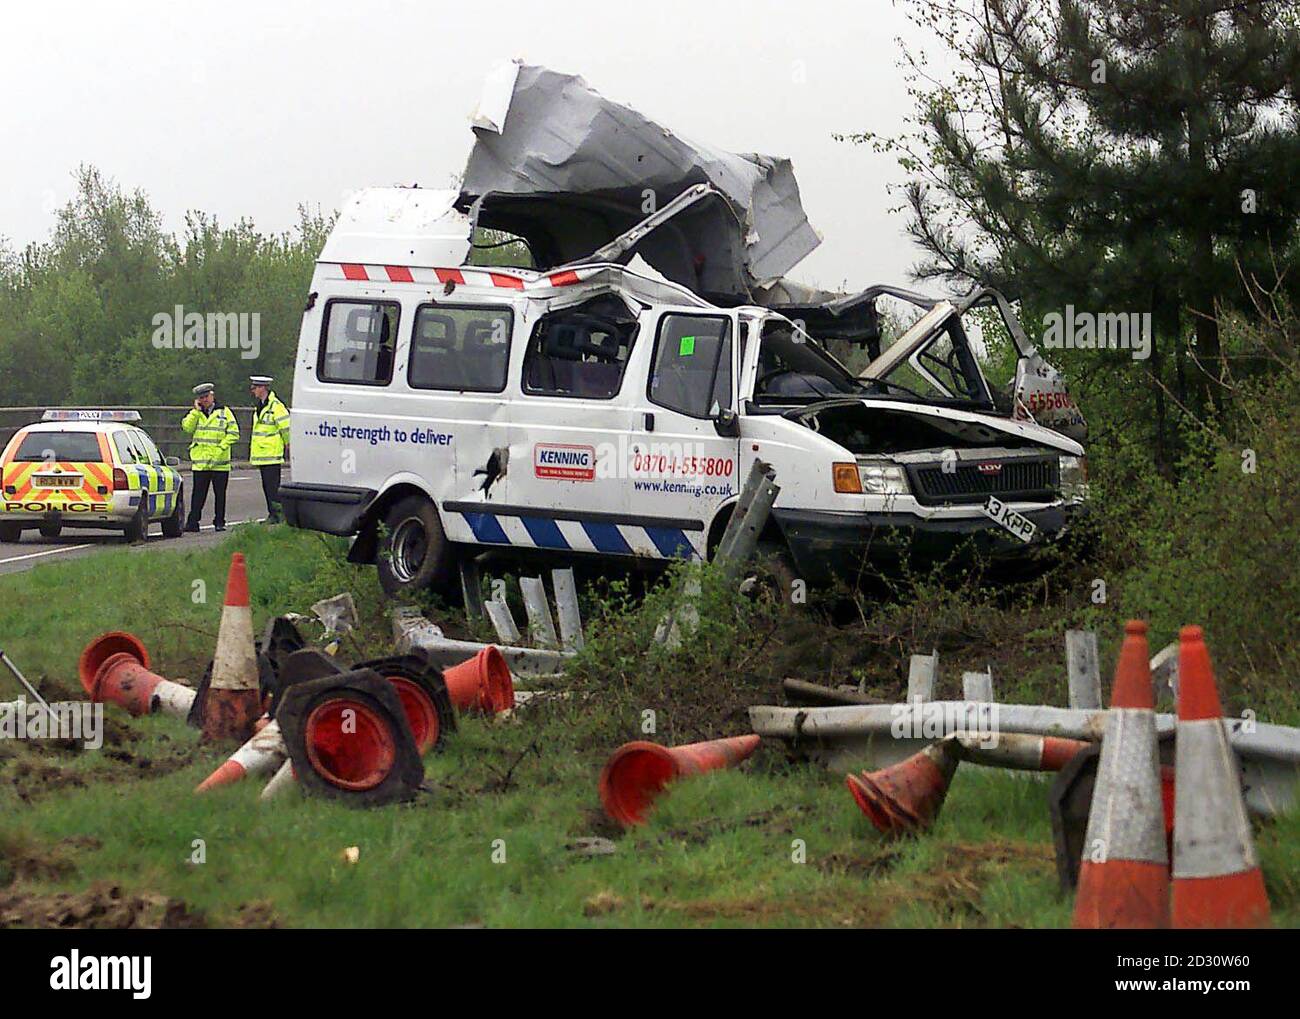 The scene of a minibus crash, at the Ardleigh interchange near Colchester, Essex where the A12 joins the A120 Clacton-bound road. A woman was killed and several children left shocked and badly shaken.  * The bus, taking them on a day trip to the seaside, overturned while apparently negotiating a sharp corner. No other vehicles were thought to have been involved. S Stock Photo